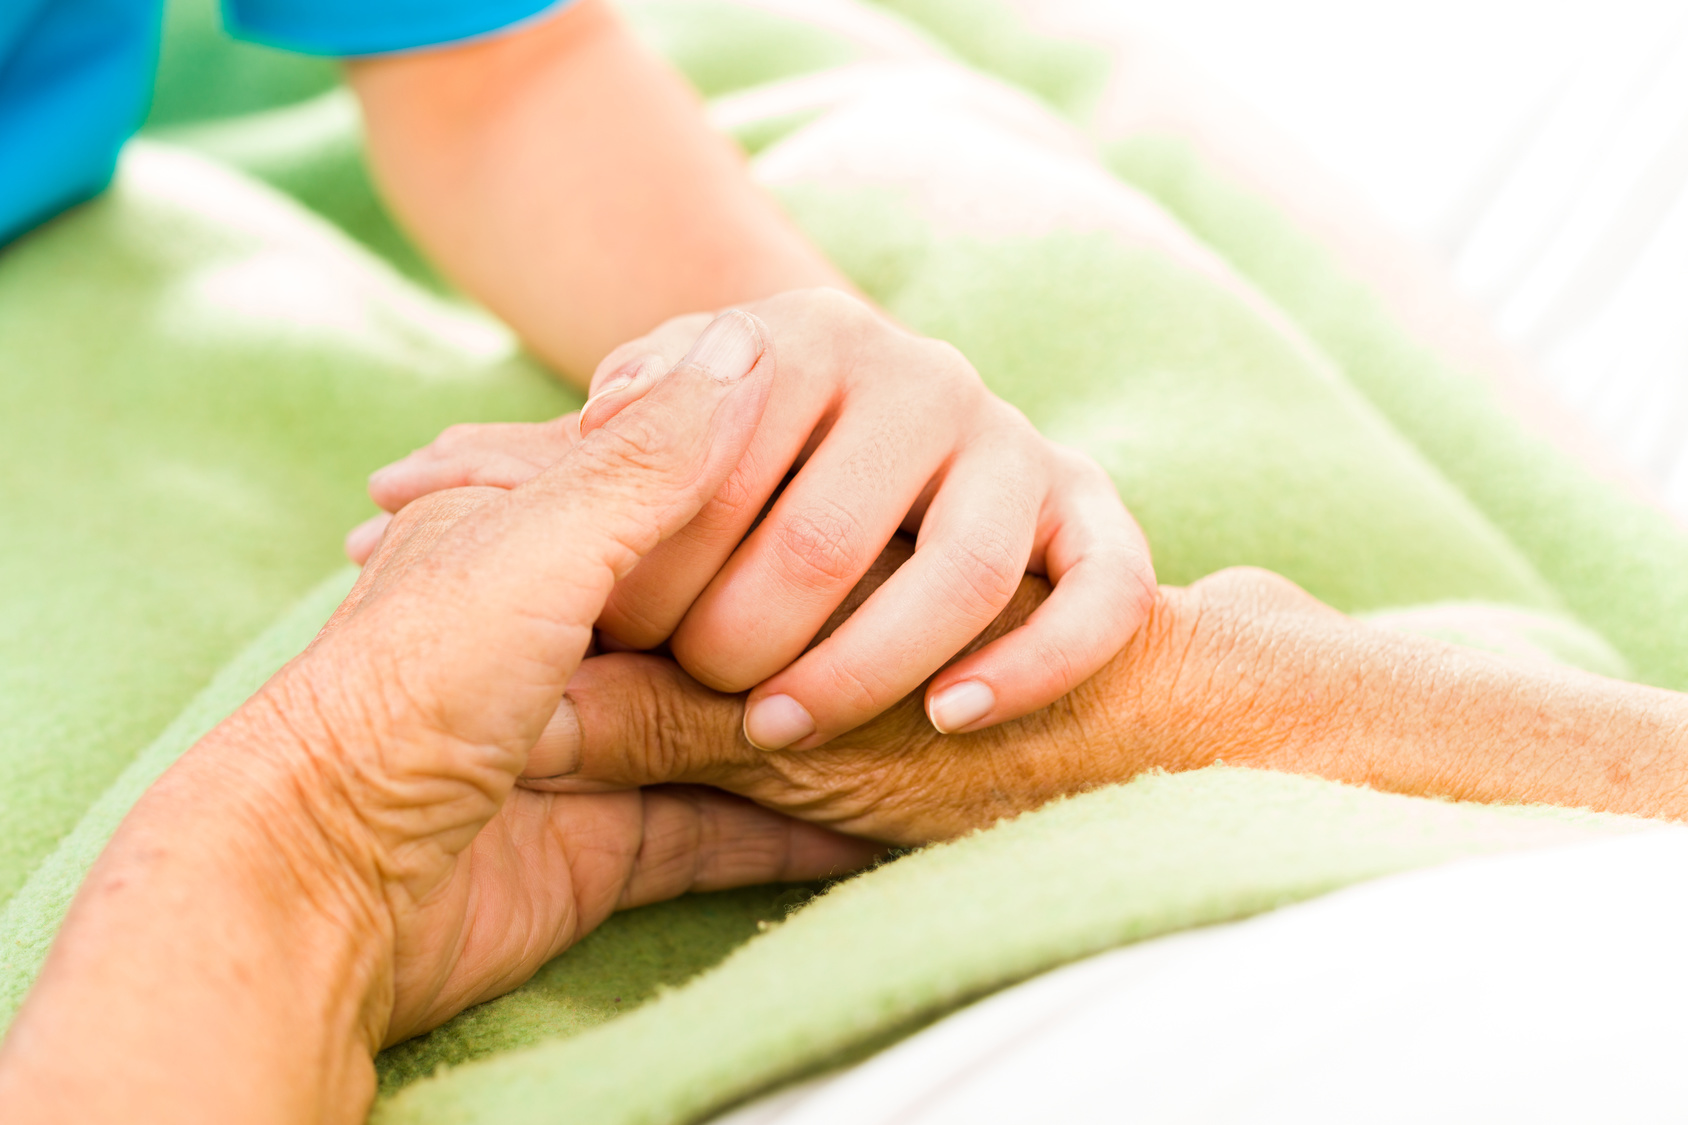 Health Care Nurse Caring For Elderly Concept - Holding Hands.